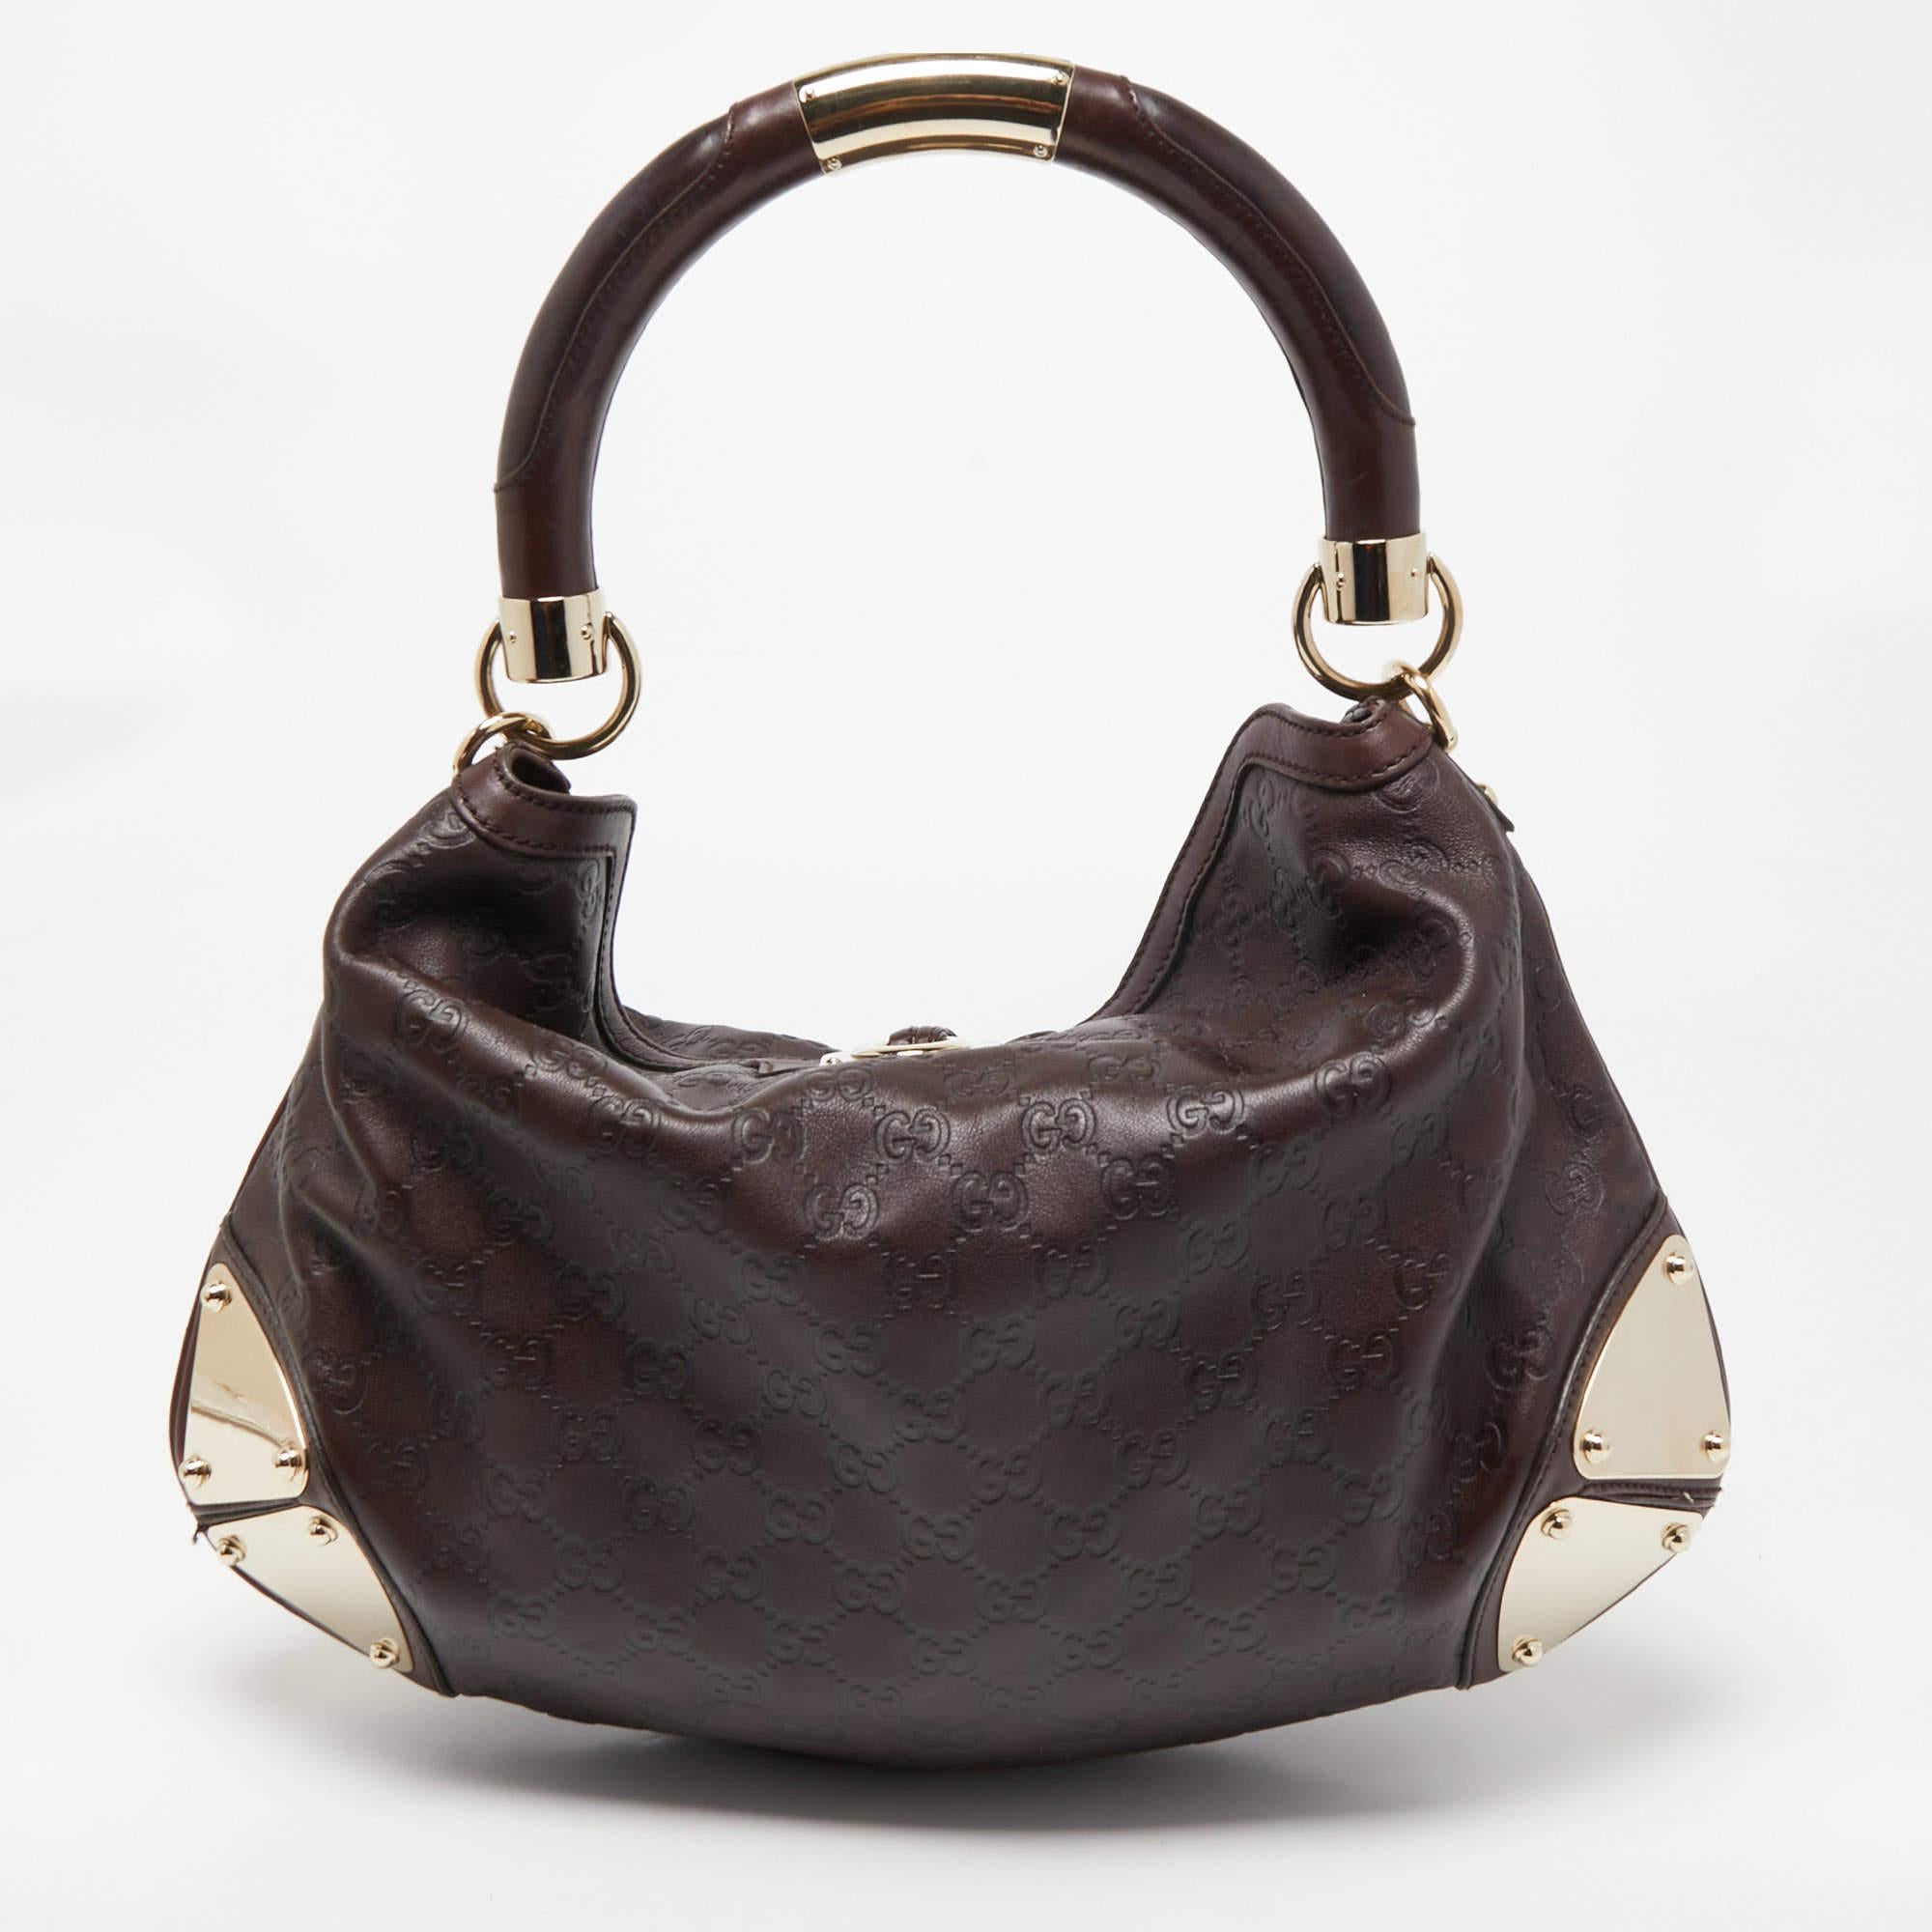 Stylish handbags never fail to make a fashionable impression. Make this designer hobo yours by pairing it with your sophisticated workwear as well as chic casual looks.

Includes: Original Dustbag, Detachable Strap

